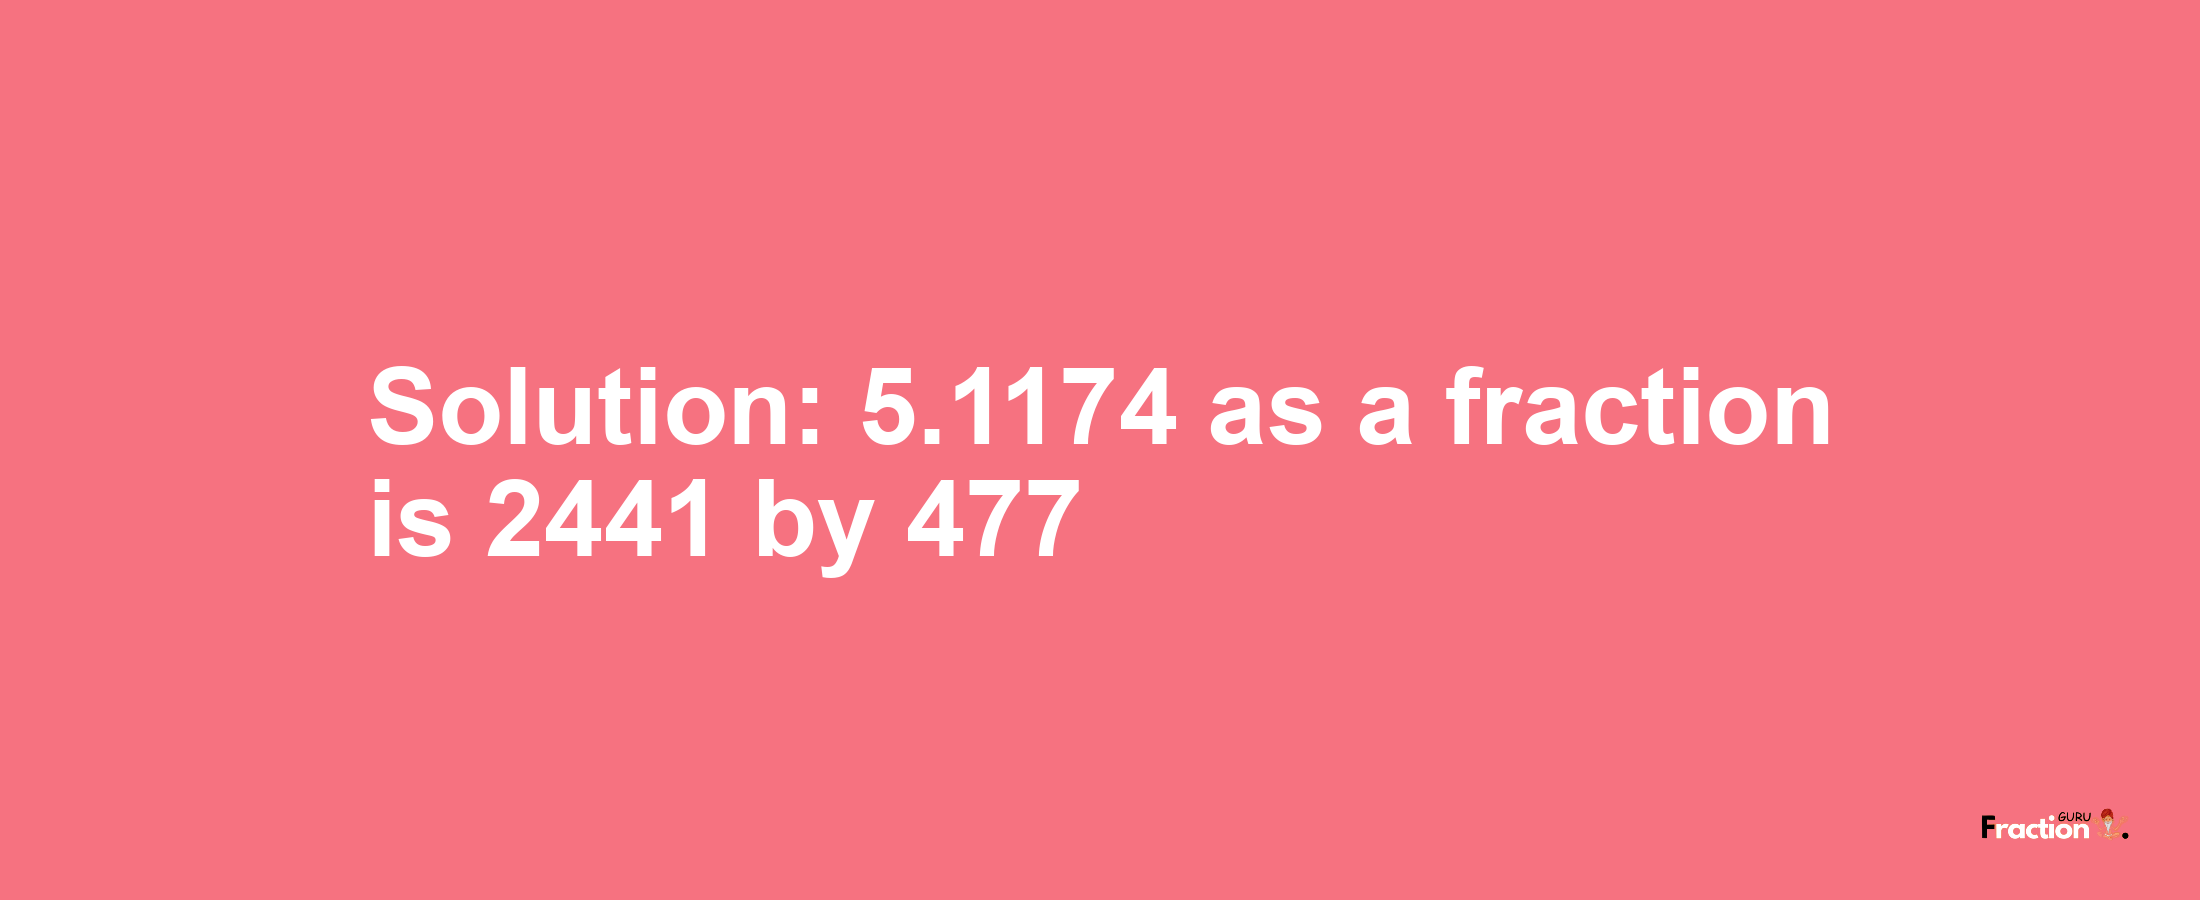 Solution:5.1174 as a fraction is 2441/477